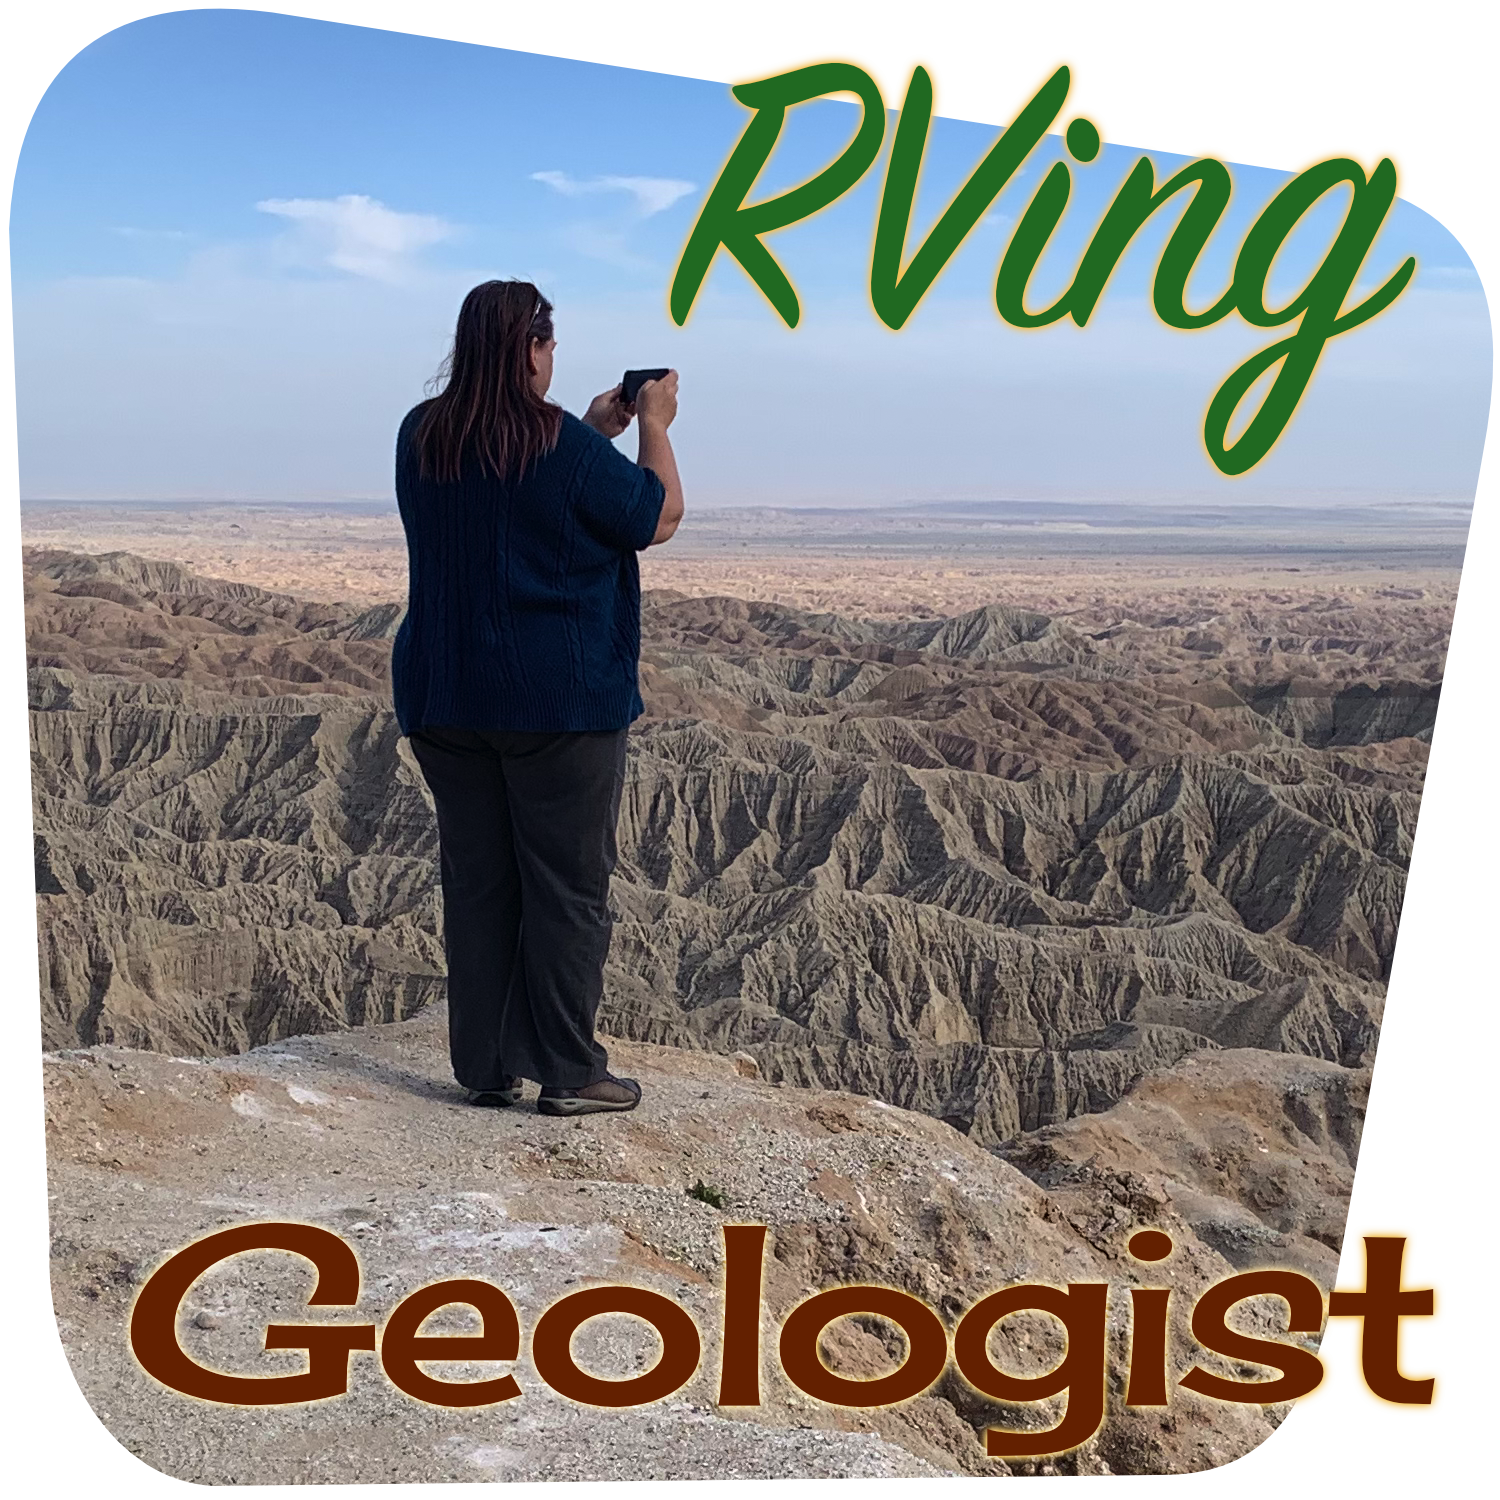 The RVing Geologist